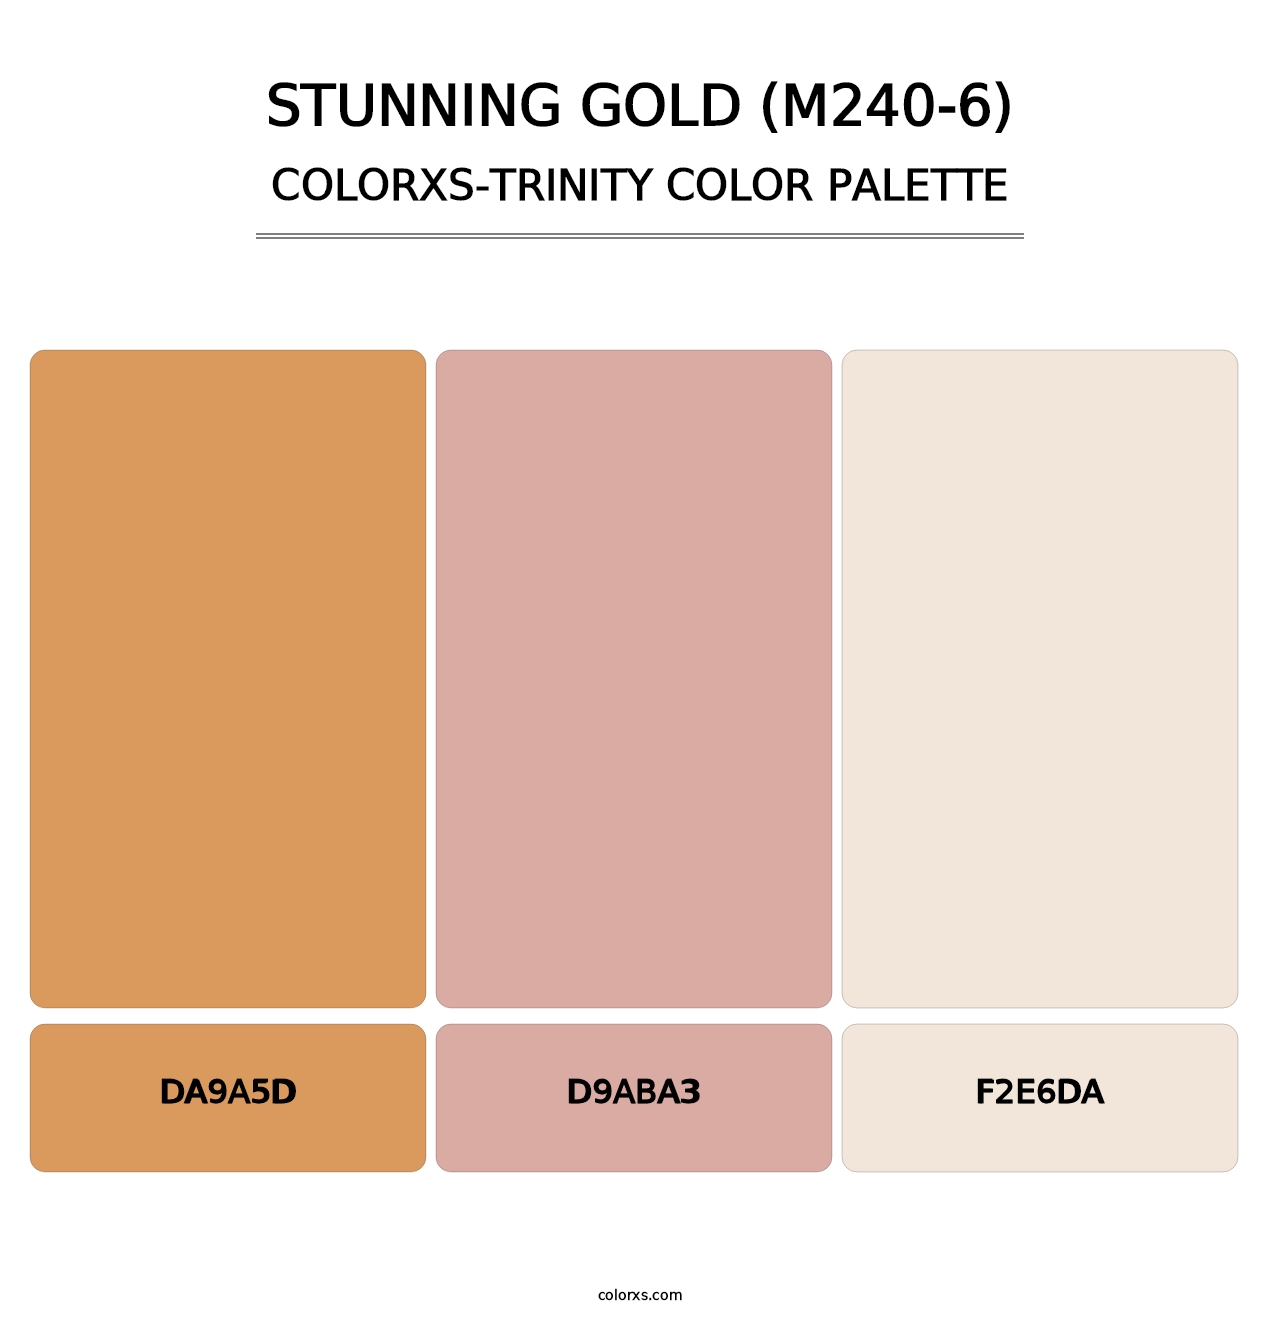 Stunning Gold (M240-6) - Colorxs Trinity Palette